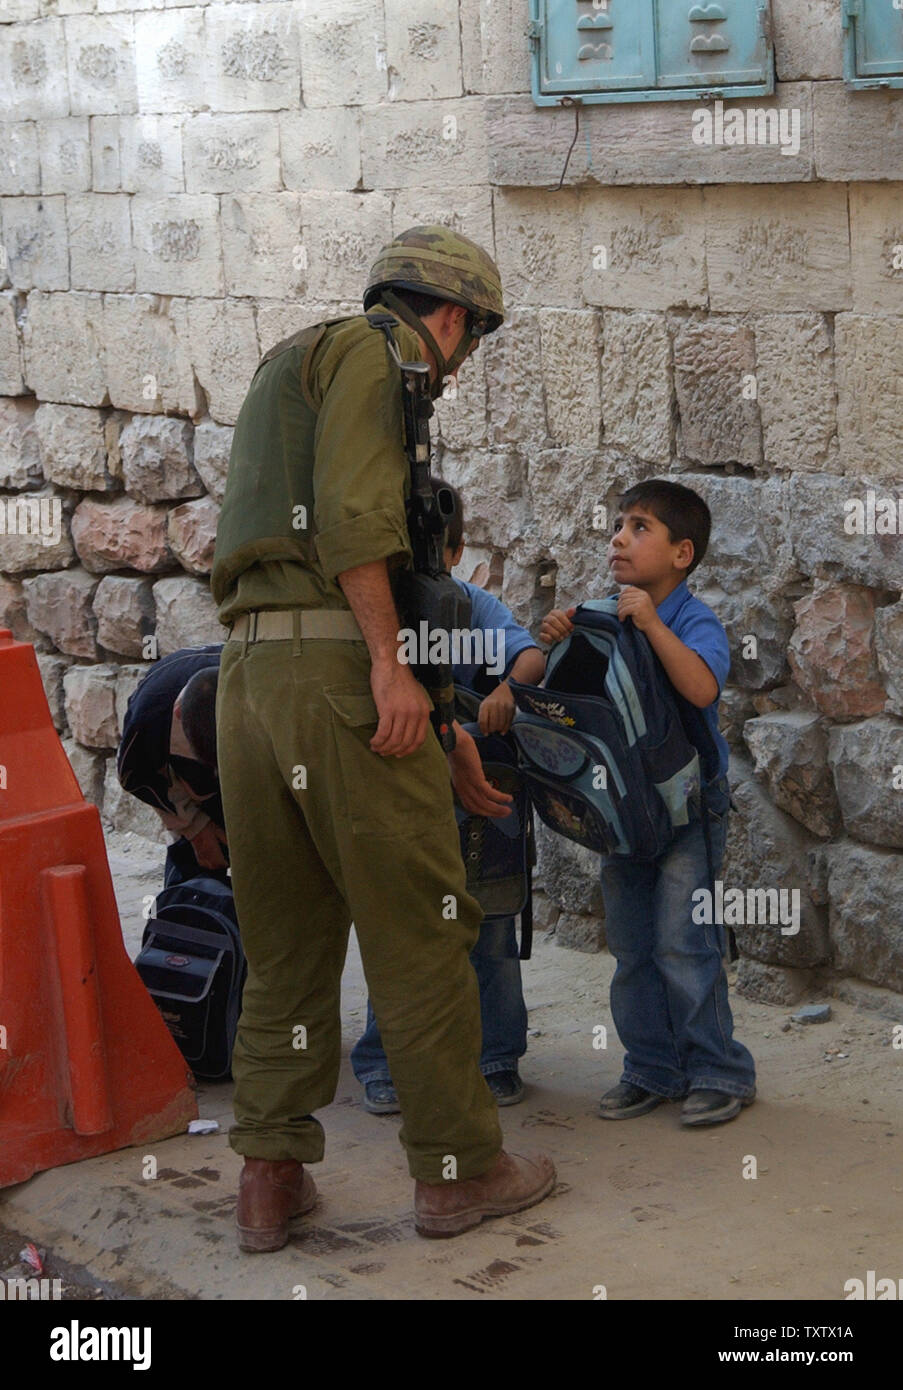 An Israeli soldier checks the schoolbag of a Palestinian boy at a checkpoint in the Biblical city of Hebron, October 14, 2003, traditionally believed to be the burial site of Abraham, Isaac, Jacob and their wives during the week long Jewish religious holiday of Sukkot. (UPI Photo/Debbie Hill) Stock Photo